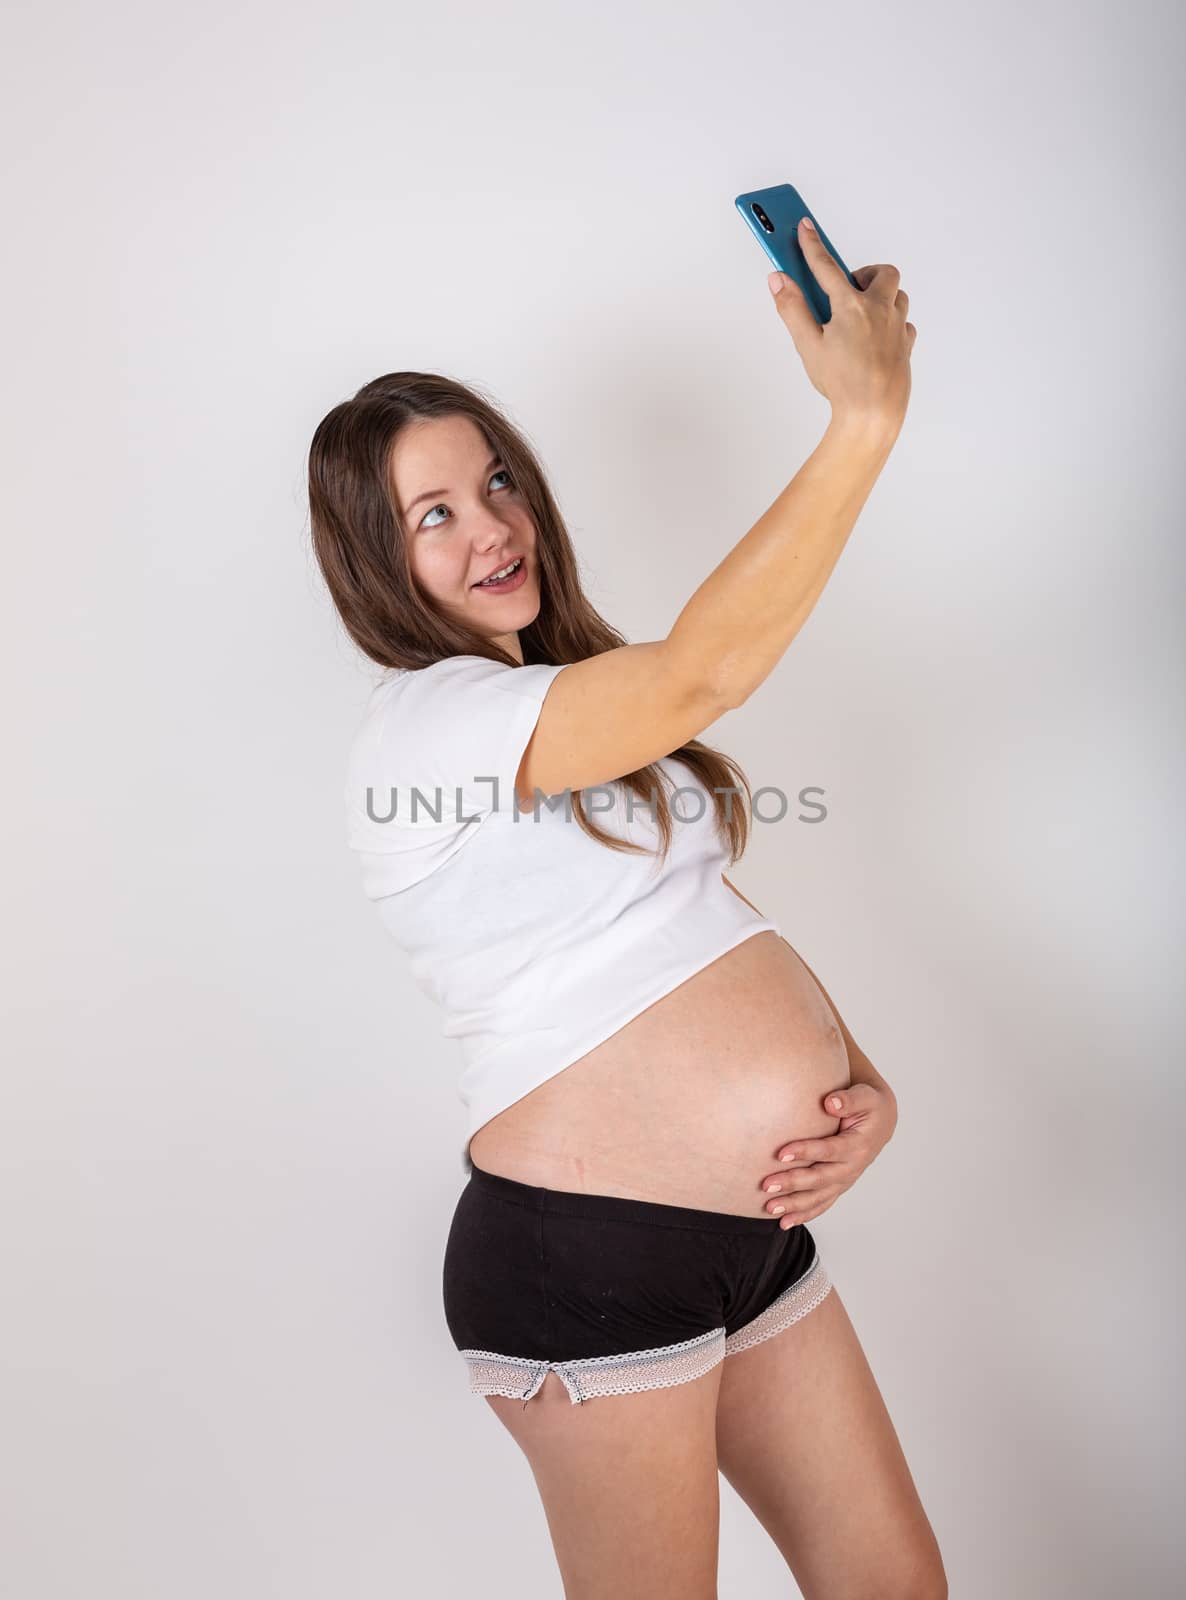 Cute pregnant woman on the phone while lying on a white background by Vassiliy